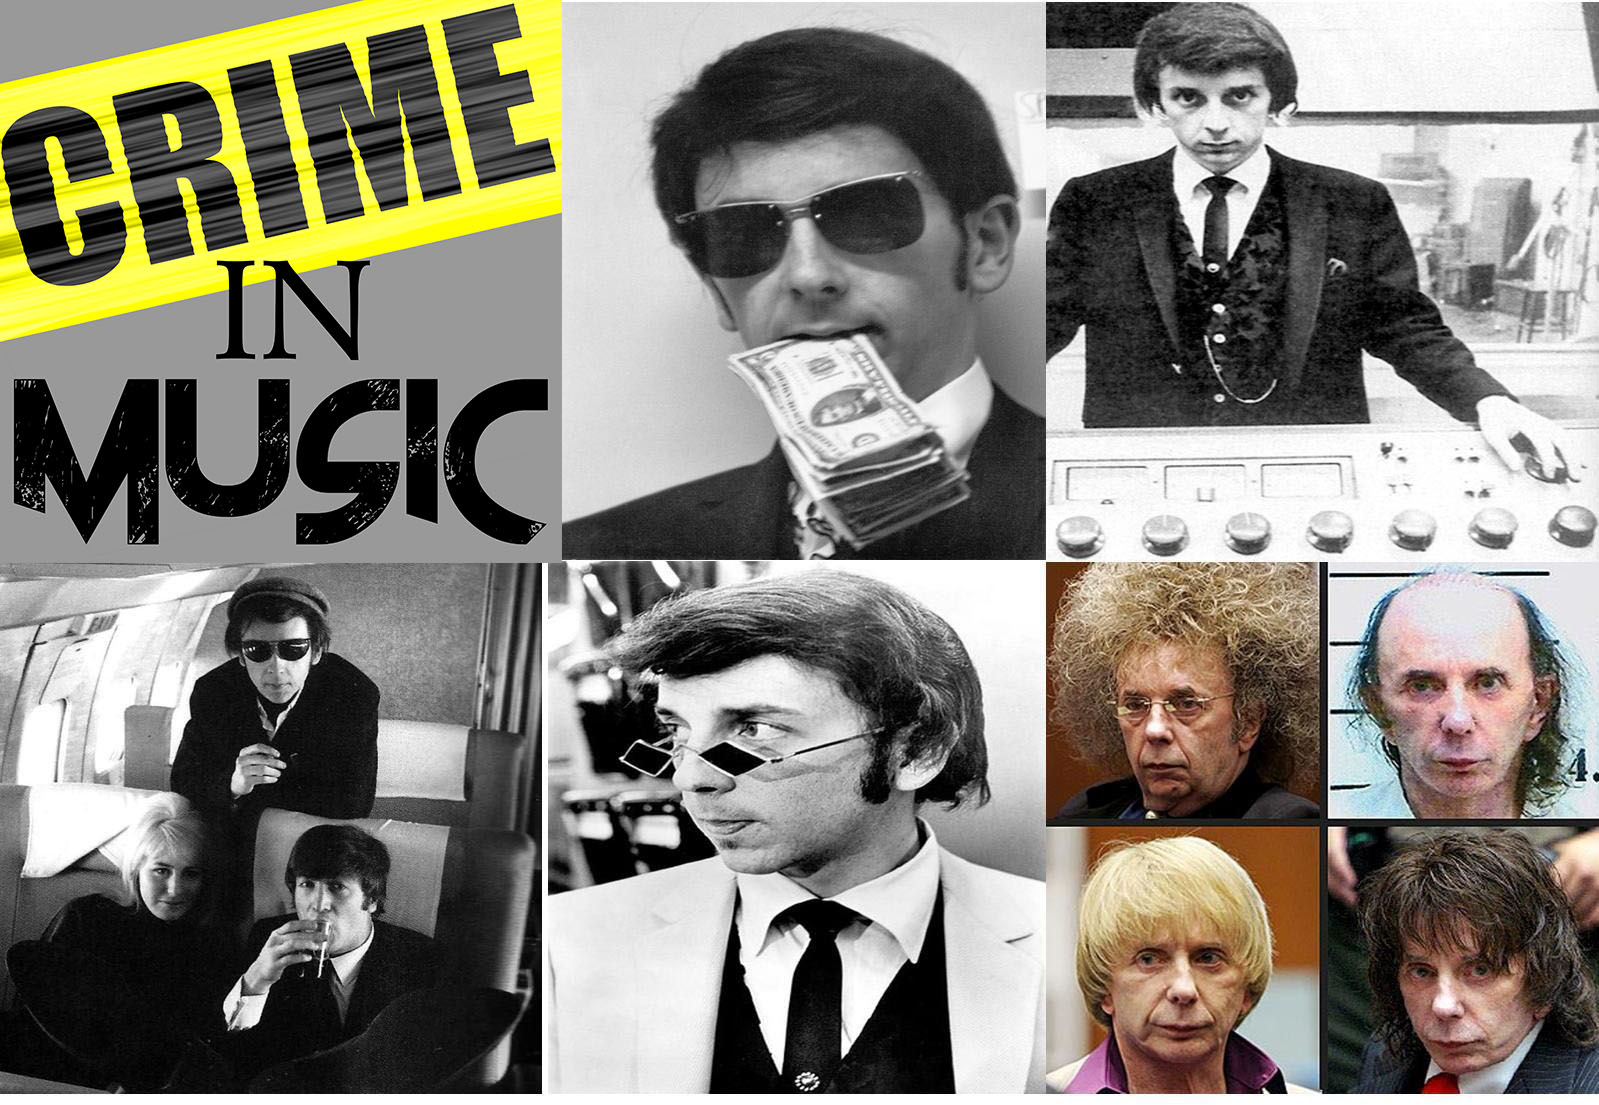 photo collage of Phil Spector, Musician, producer, innovator